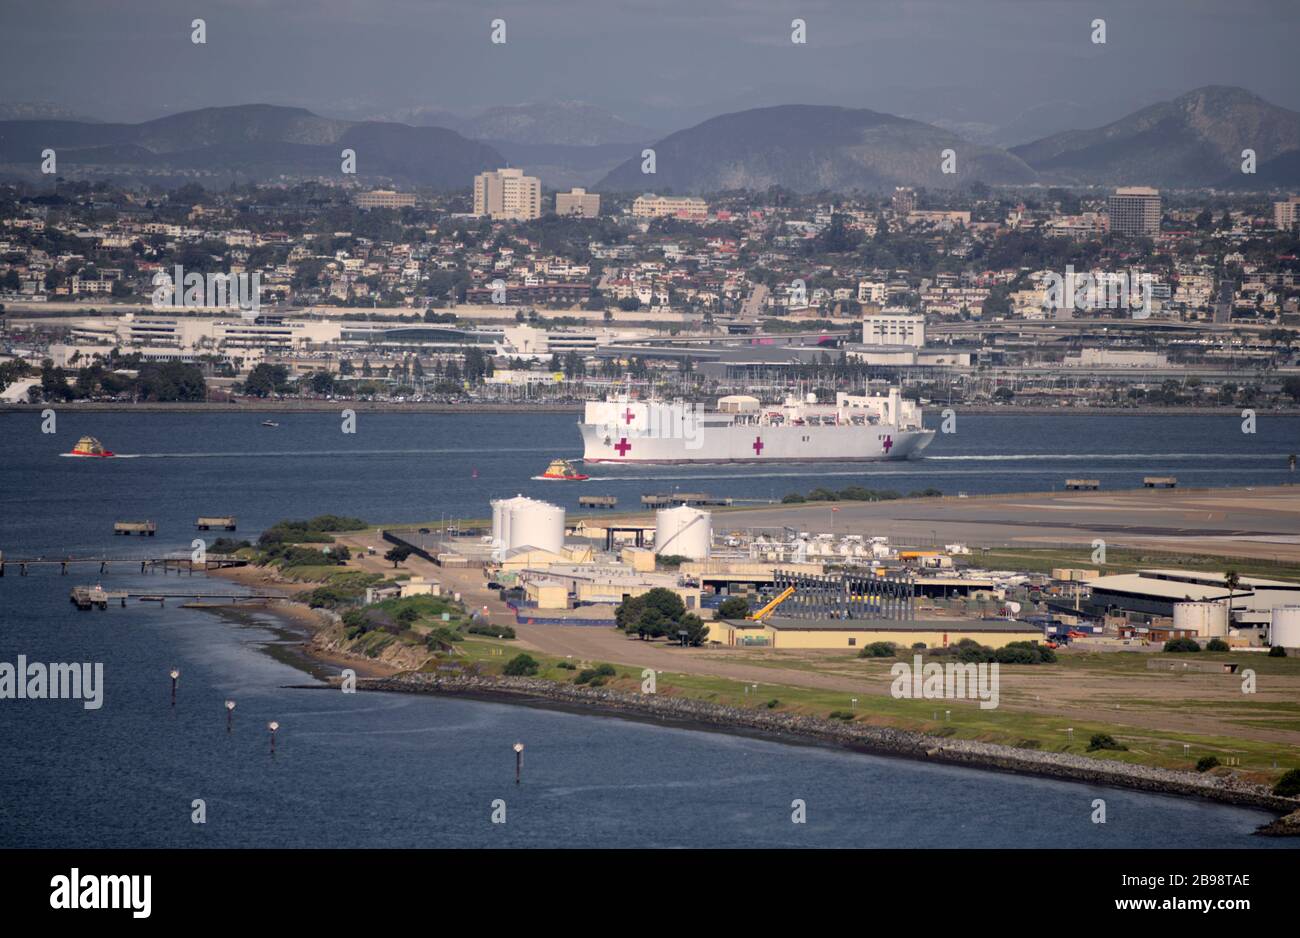 San Diego, California, USA. 23rd Mar, 2020. USNS Mercy, one of two US Navy hospital ships, departs San Diego Monday afternoon, March 23, 2020. Mercy is being deployed to the Los Angeles Harbor to provide overflow medical care with the goal of freeing up traditional hospital space for COVID-19 patients. Credit: David Barak/ZUMA Wire/Alamy Live News Stock Photo